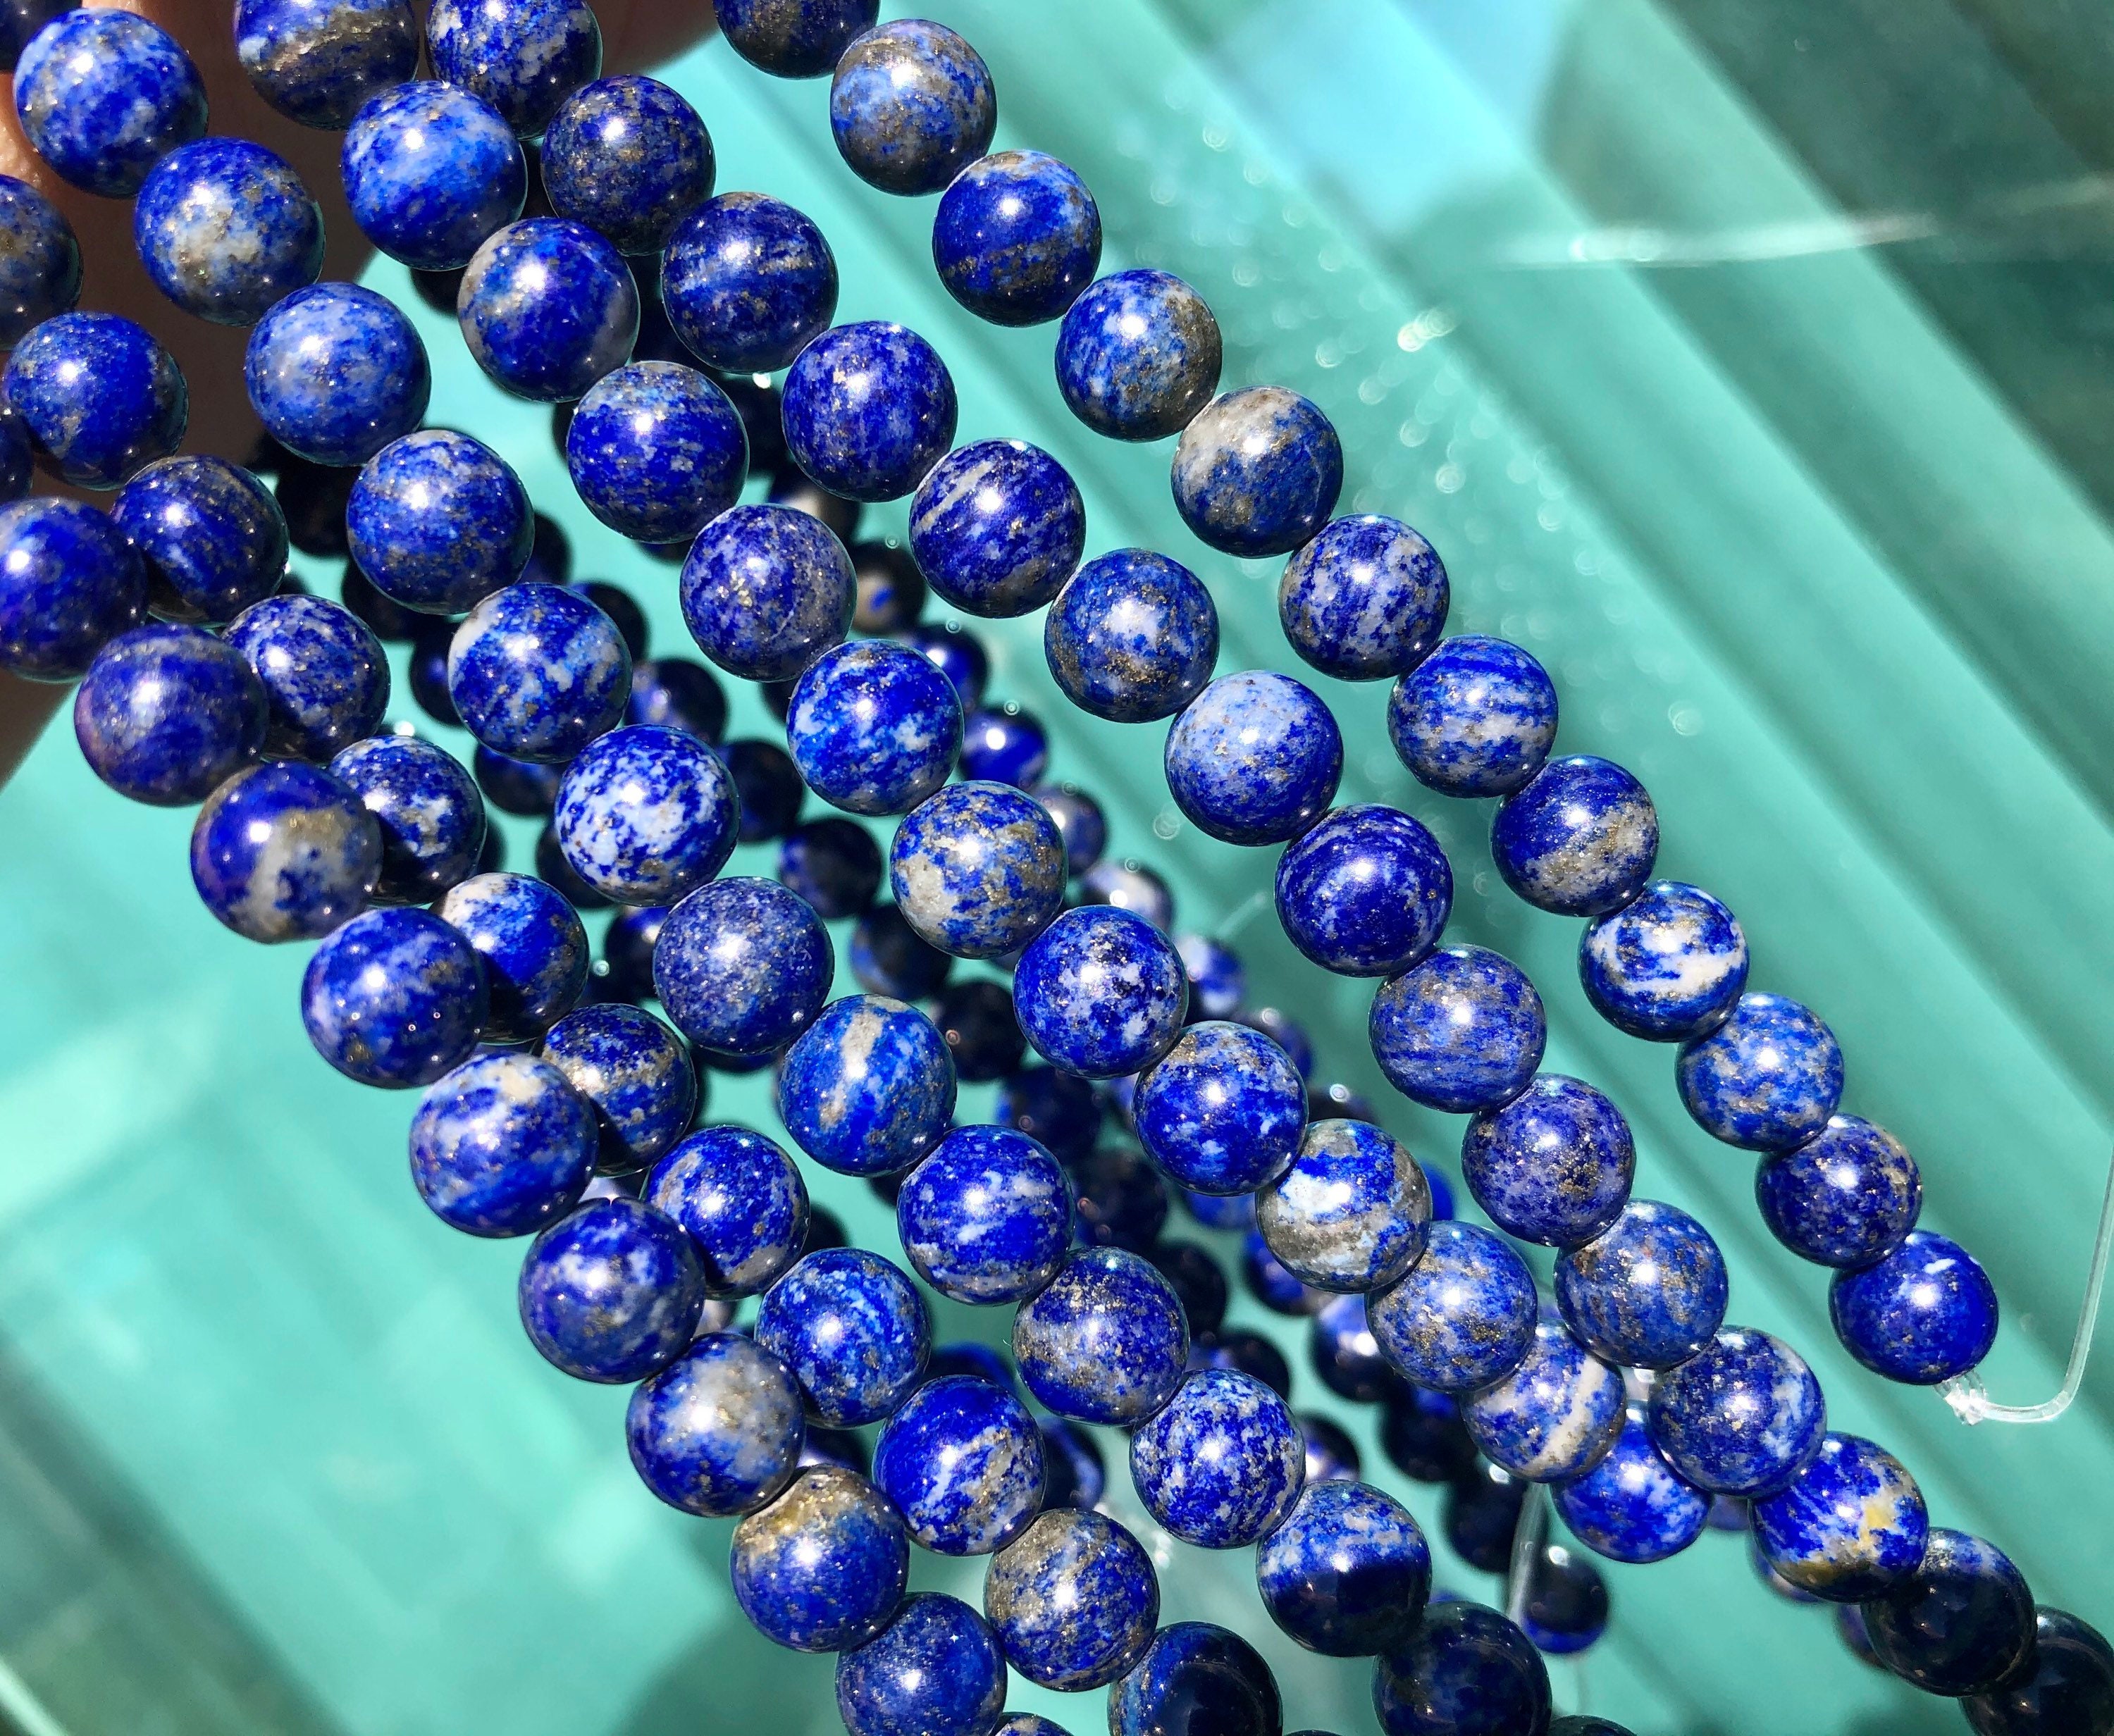 Skull Beads Blue Lazuli Lapis Beads Natural Stone for DIY Accessories  Charms Pendant Necklace Bracelet Jewelry Making 15